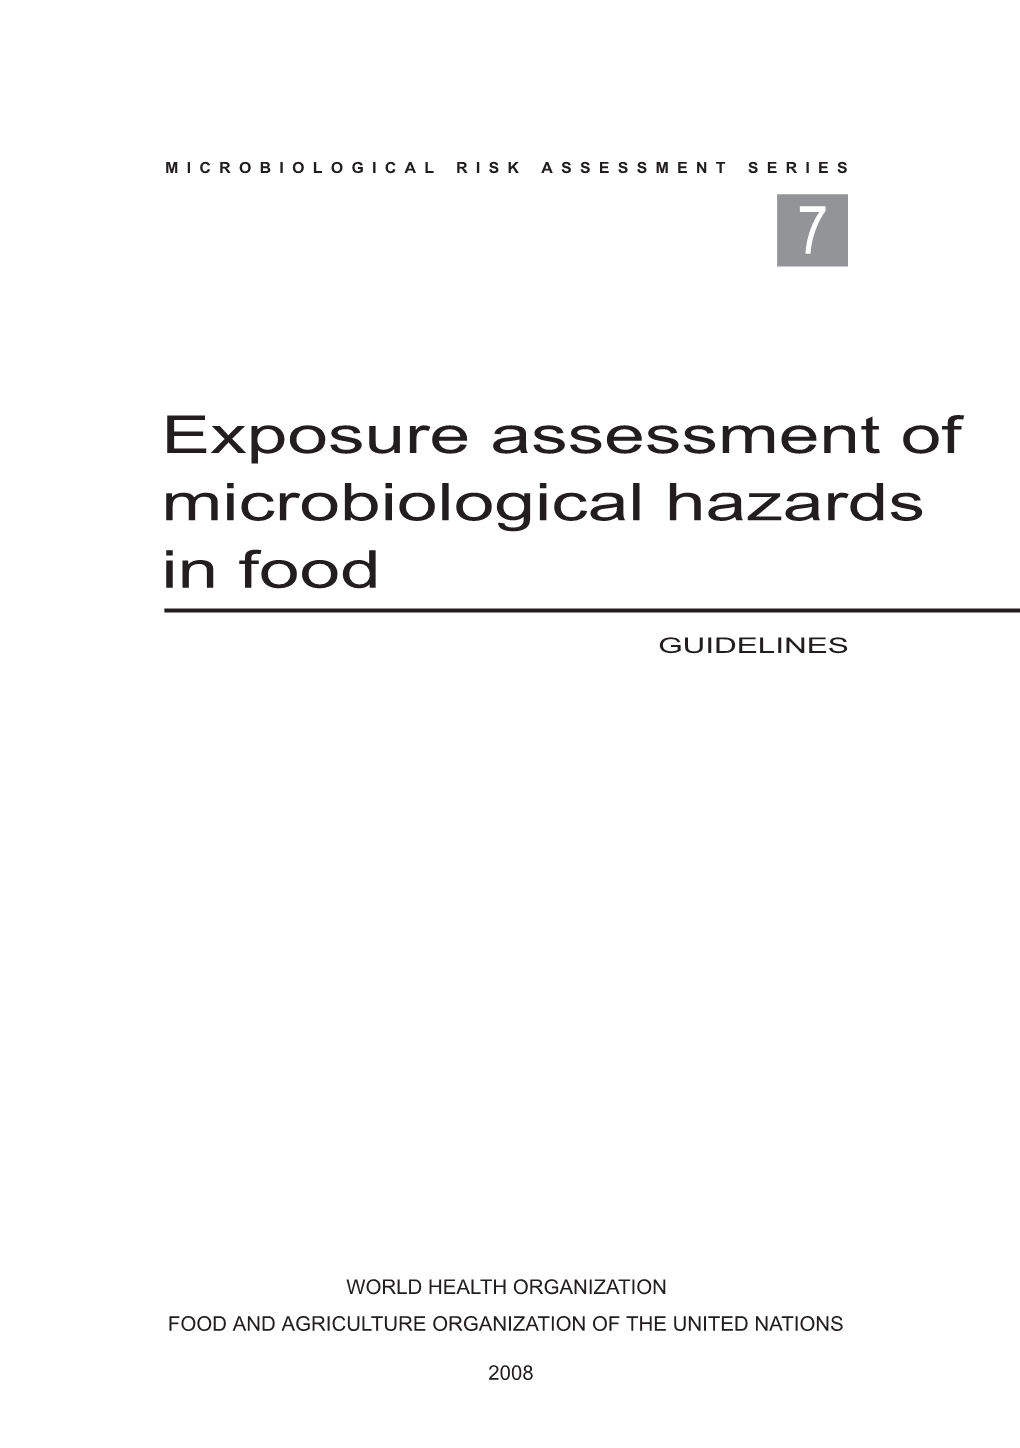 Exposure Assessment of Microbiological Hazards in Food